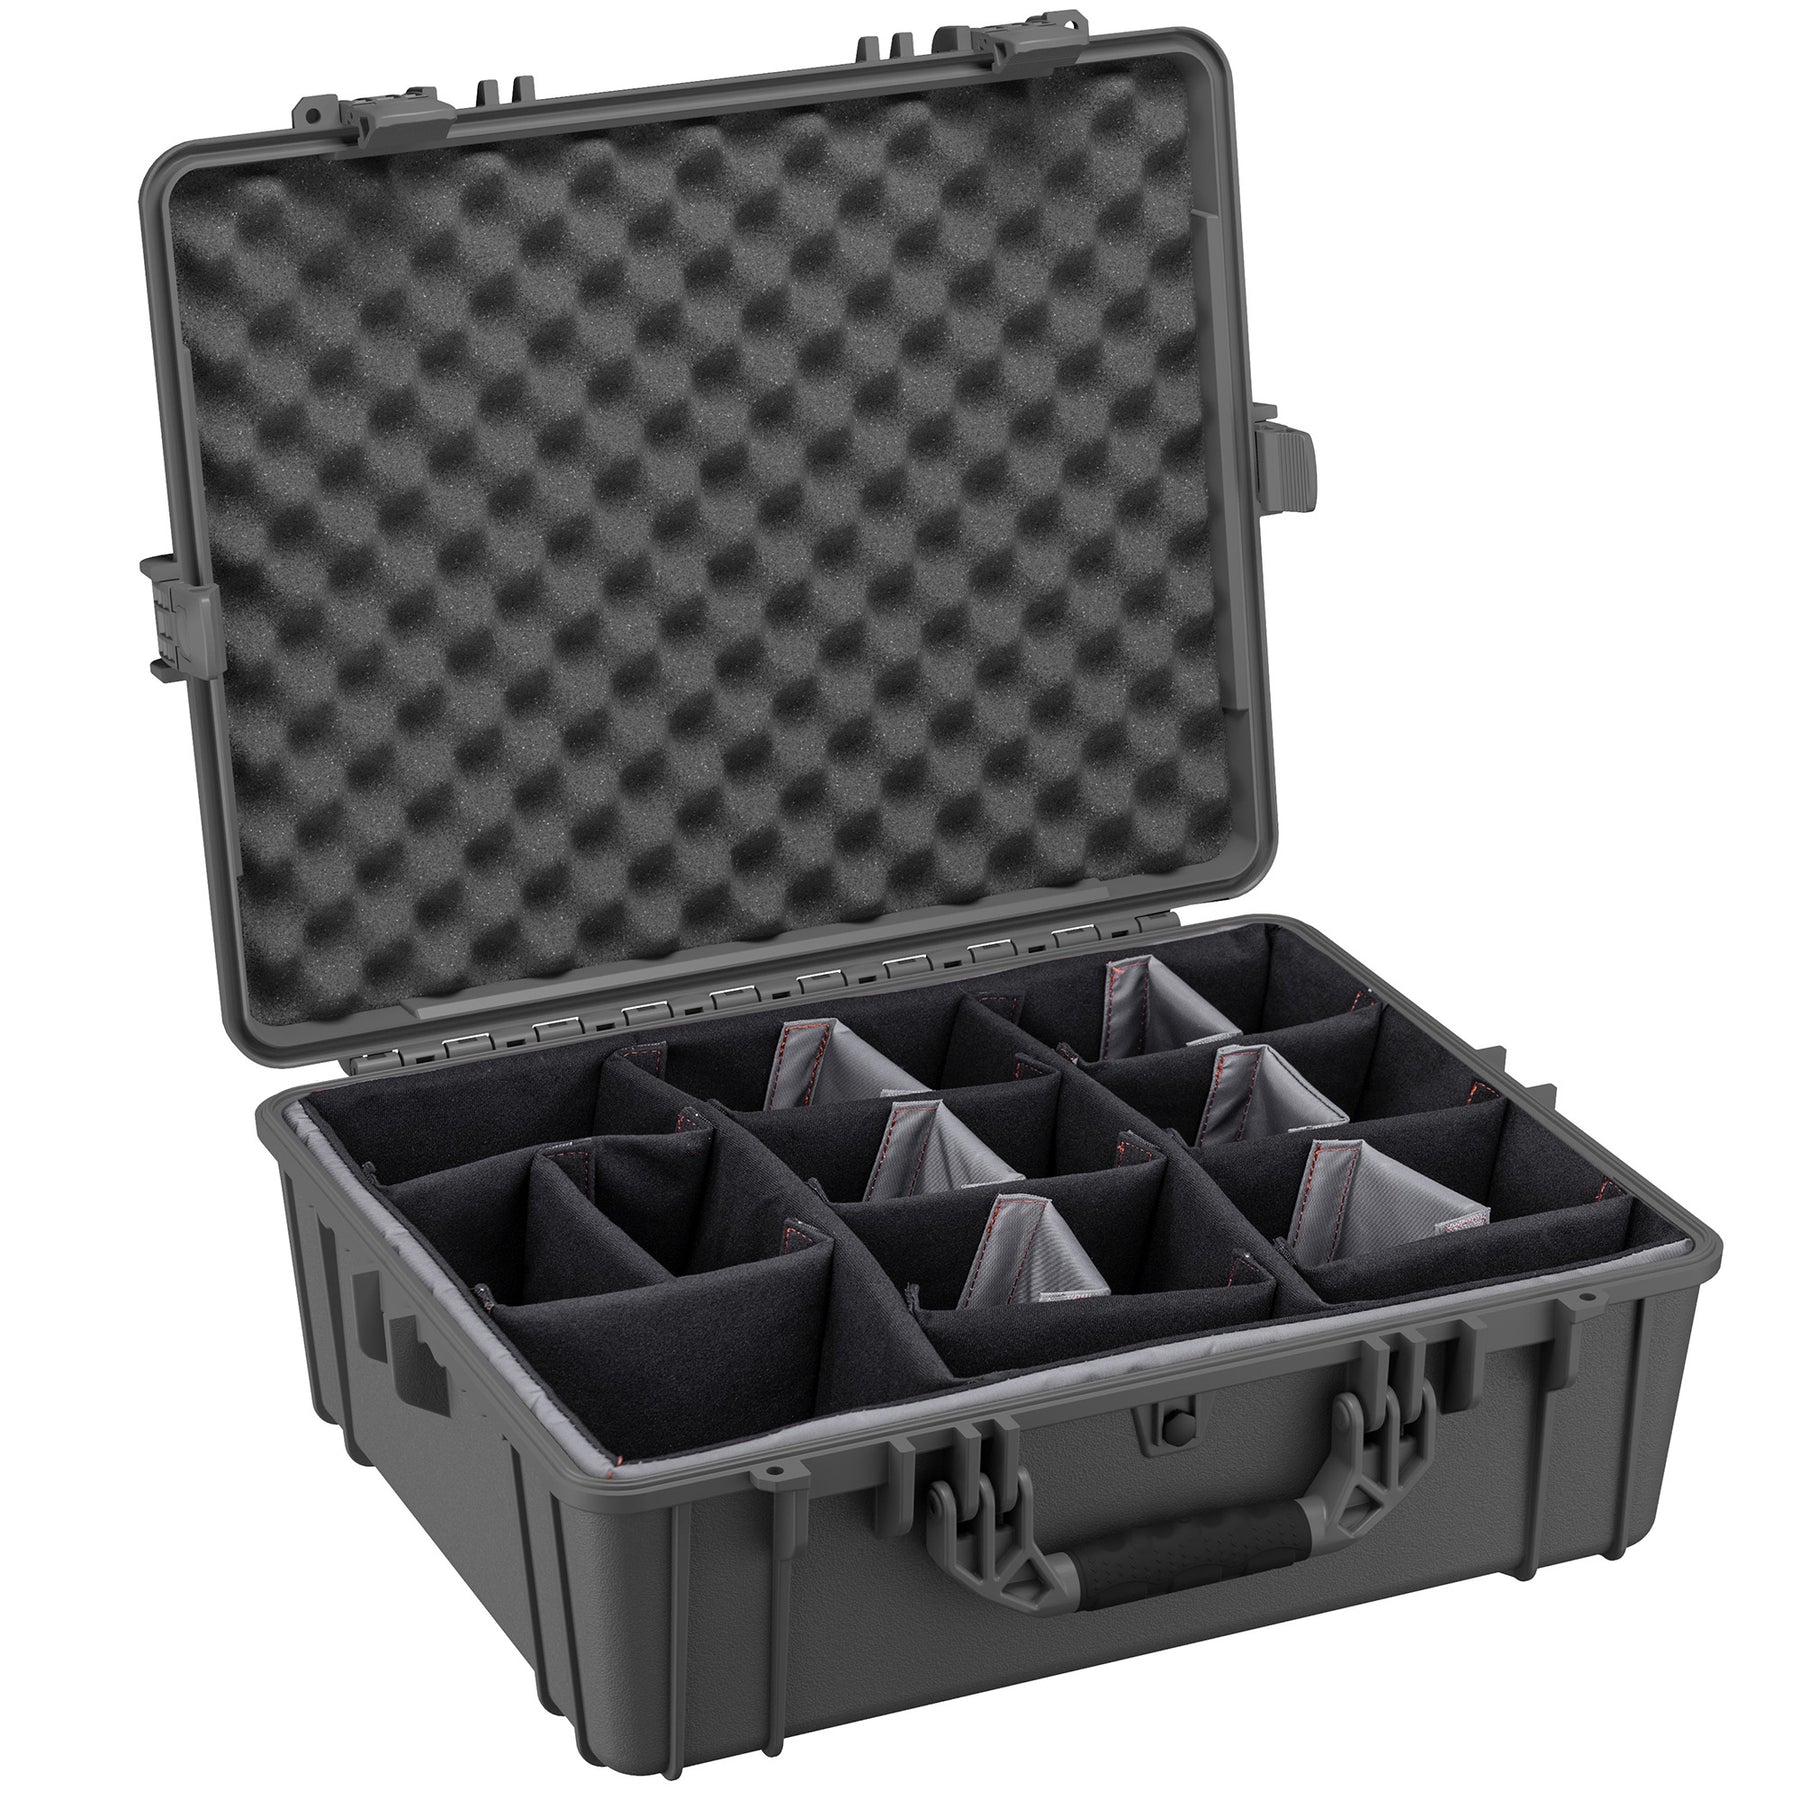 Condition 1 25 Large Waterproof Hard Case with Foam, Portable Protective  Storage Box for Travel, Camera, Tool, Hunting, Military, Tactical, 25 x  20